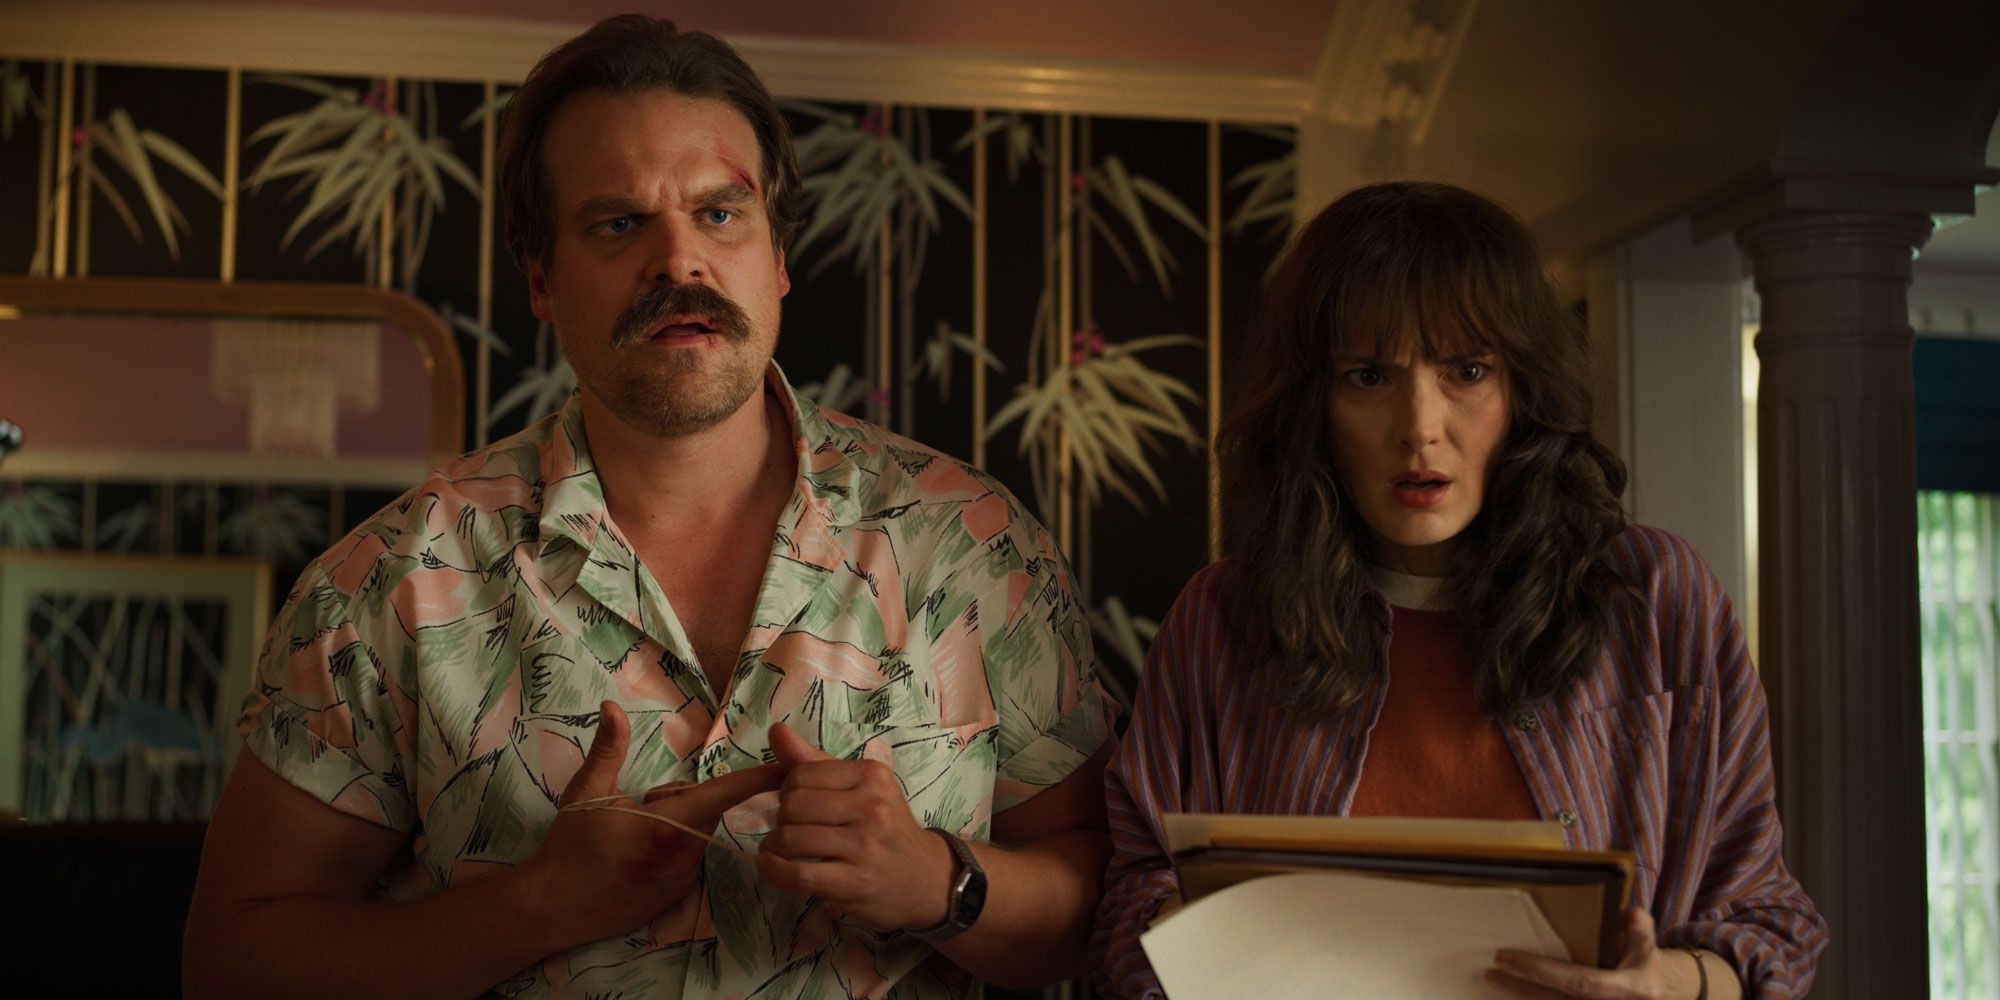 Stranger Things 3: Pop Culture Easter Egg And References